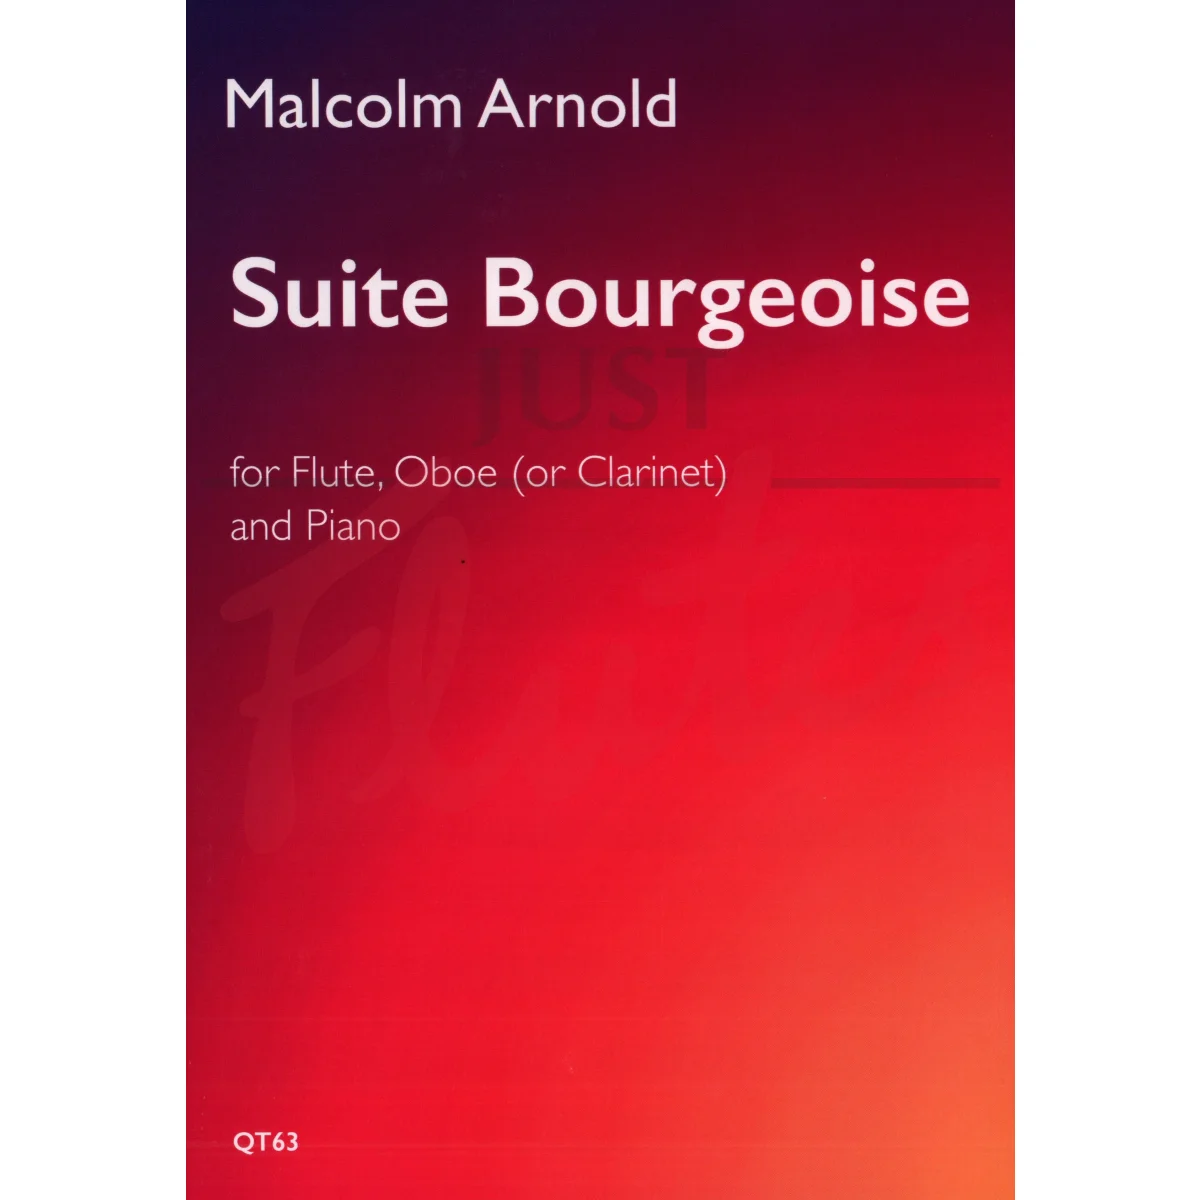 Suite Bourgeoise for Flute, Oboe/Clarinet and Piano